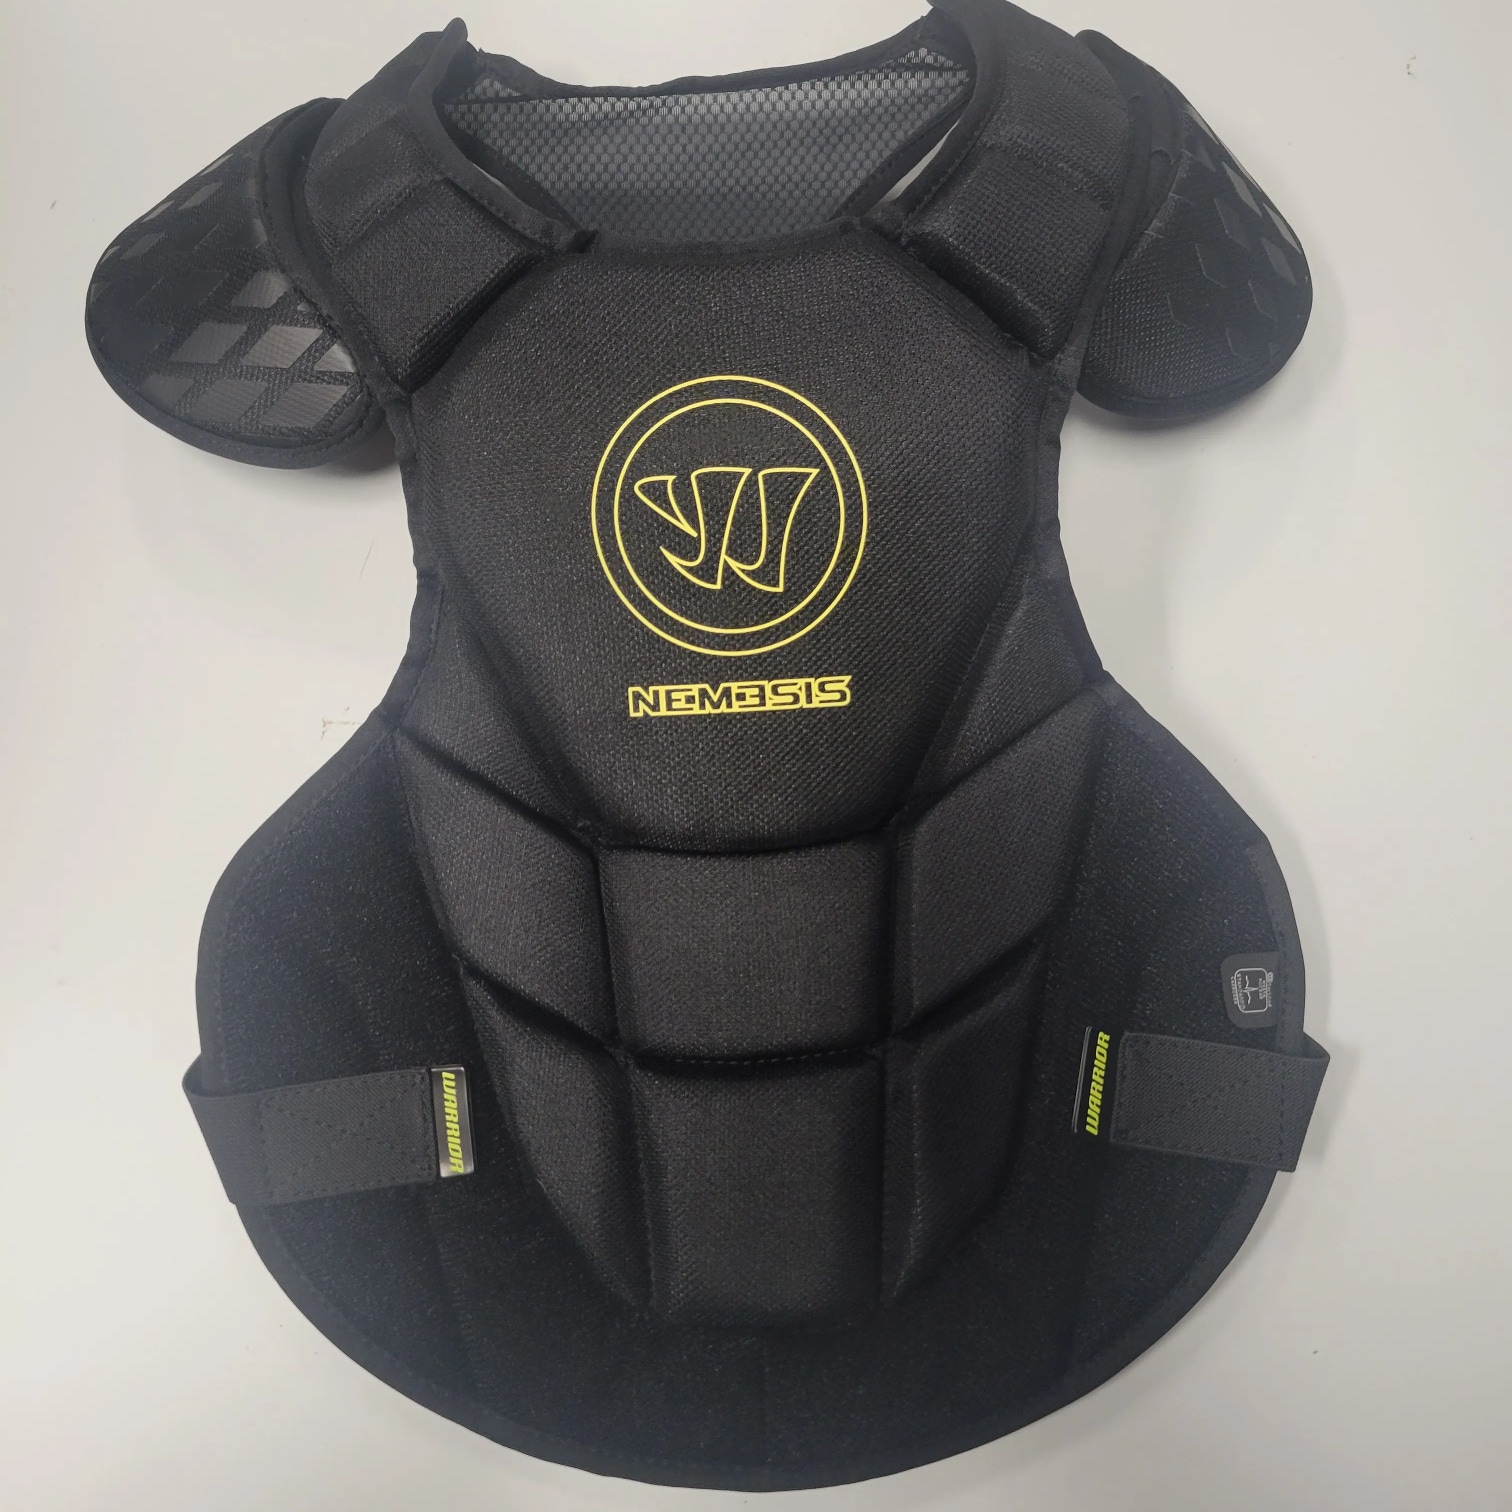 New Small Warrior Nemesis Chest Protector